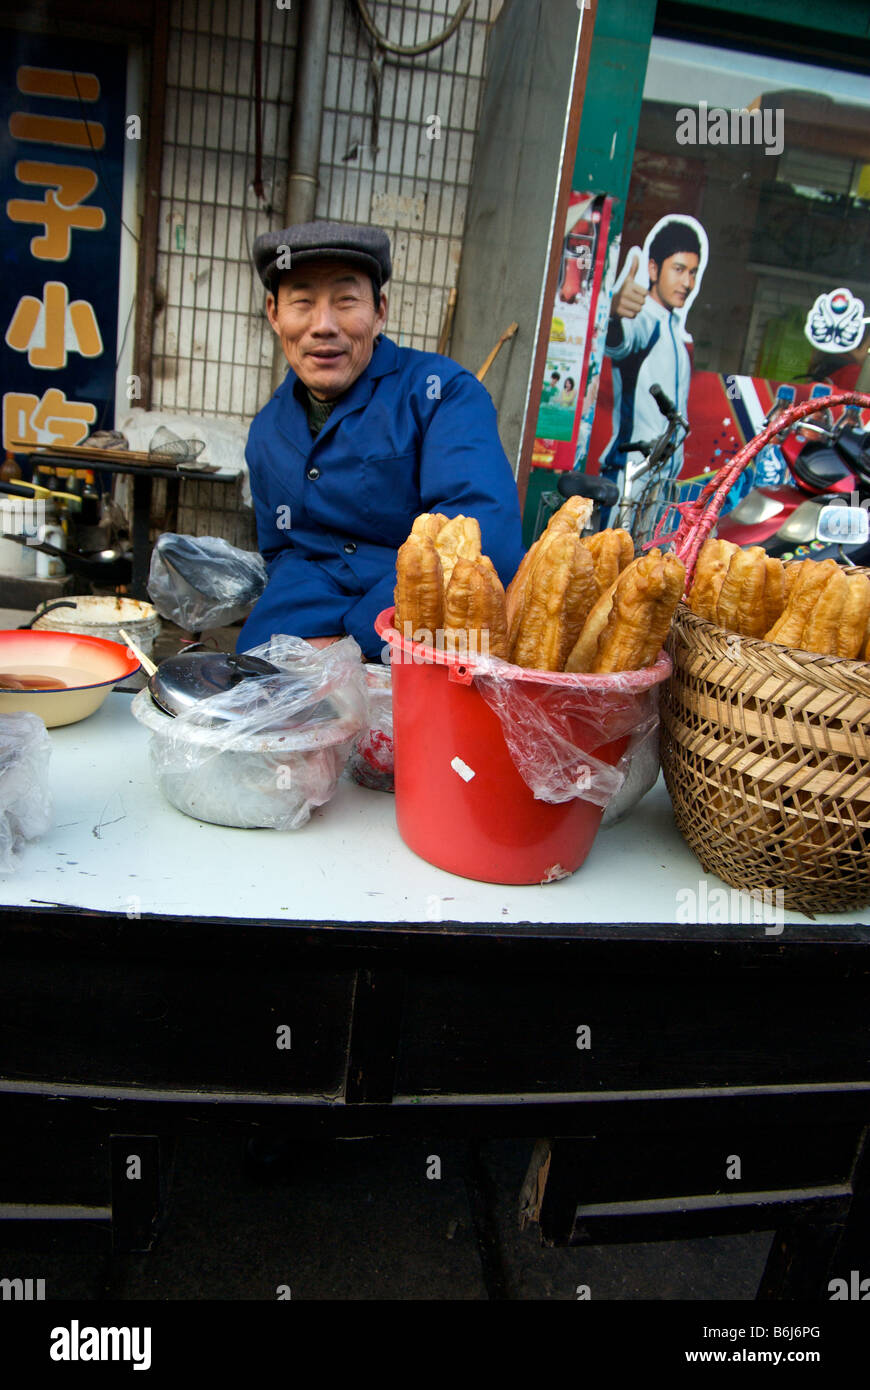 Happy vendor selling deep fried Chinese bread stick breafast and other foods at his street food stall Stock Photo